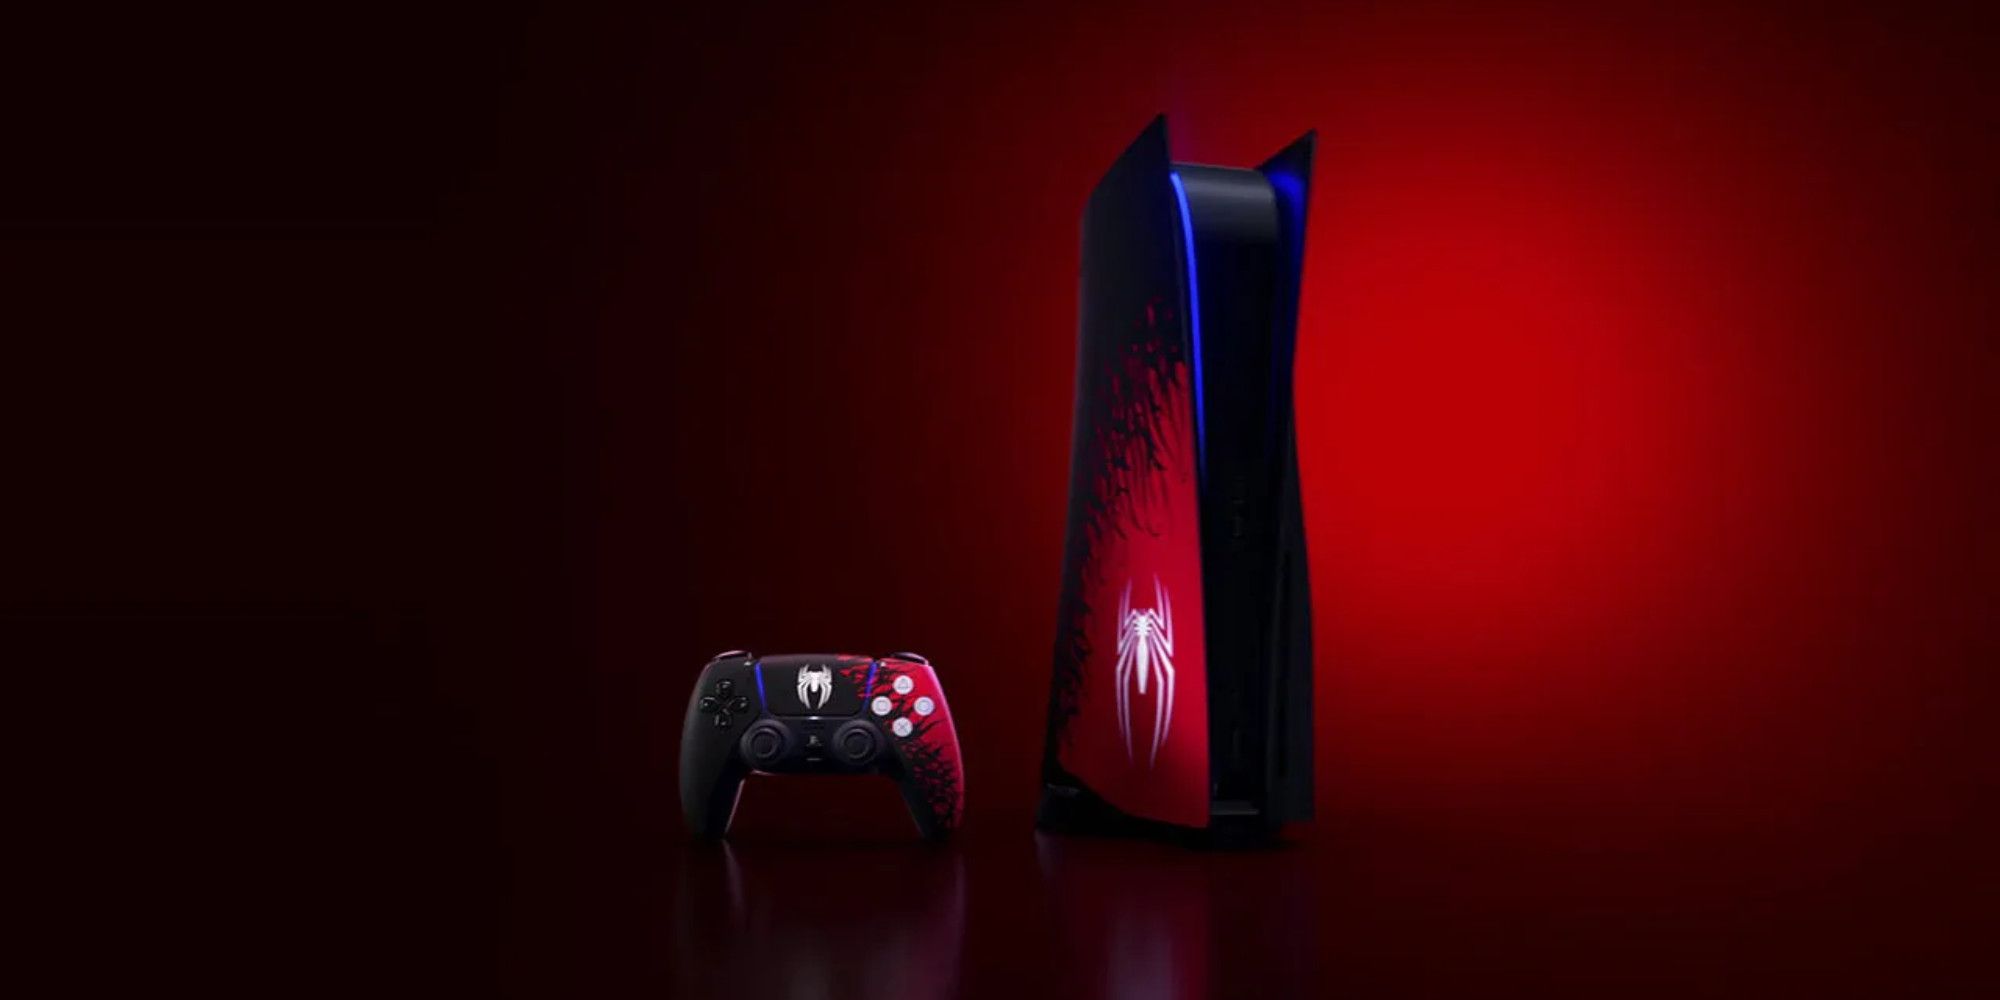 Sony's Spider-Man 2-themed PS5 is a mighty special edition